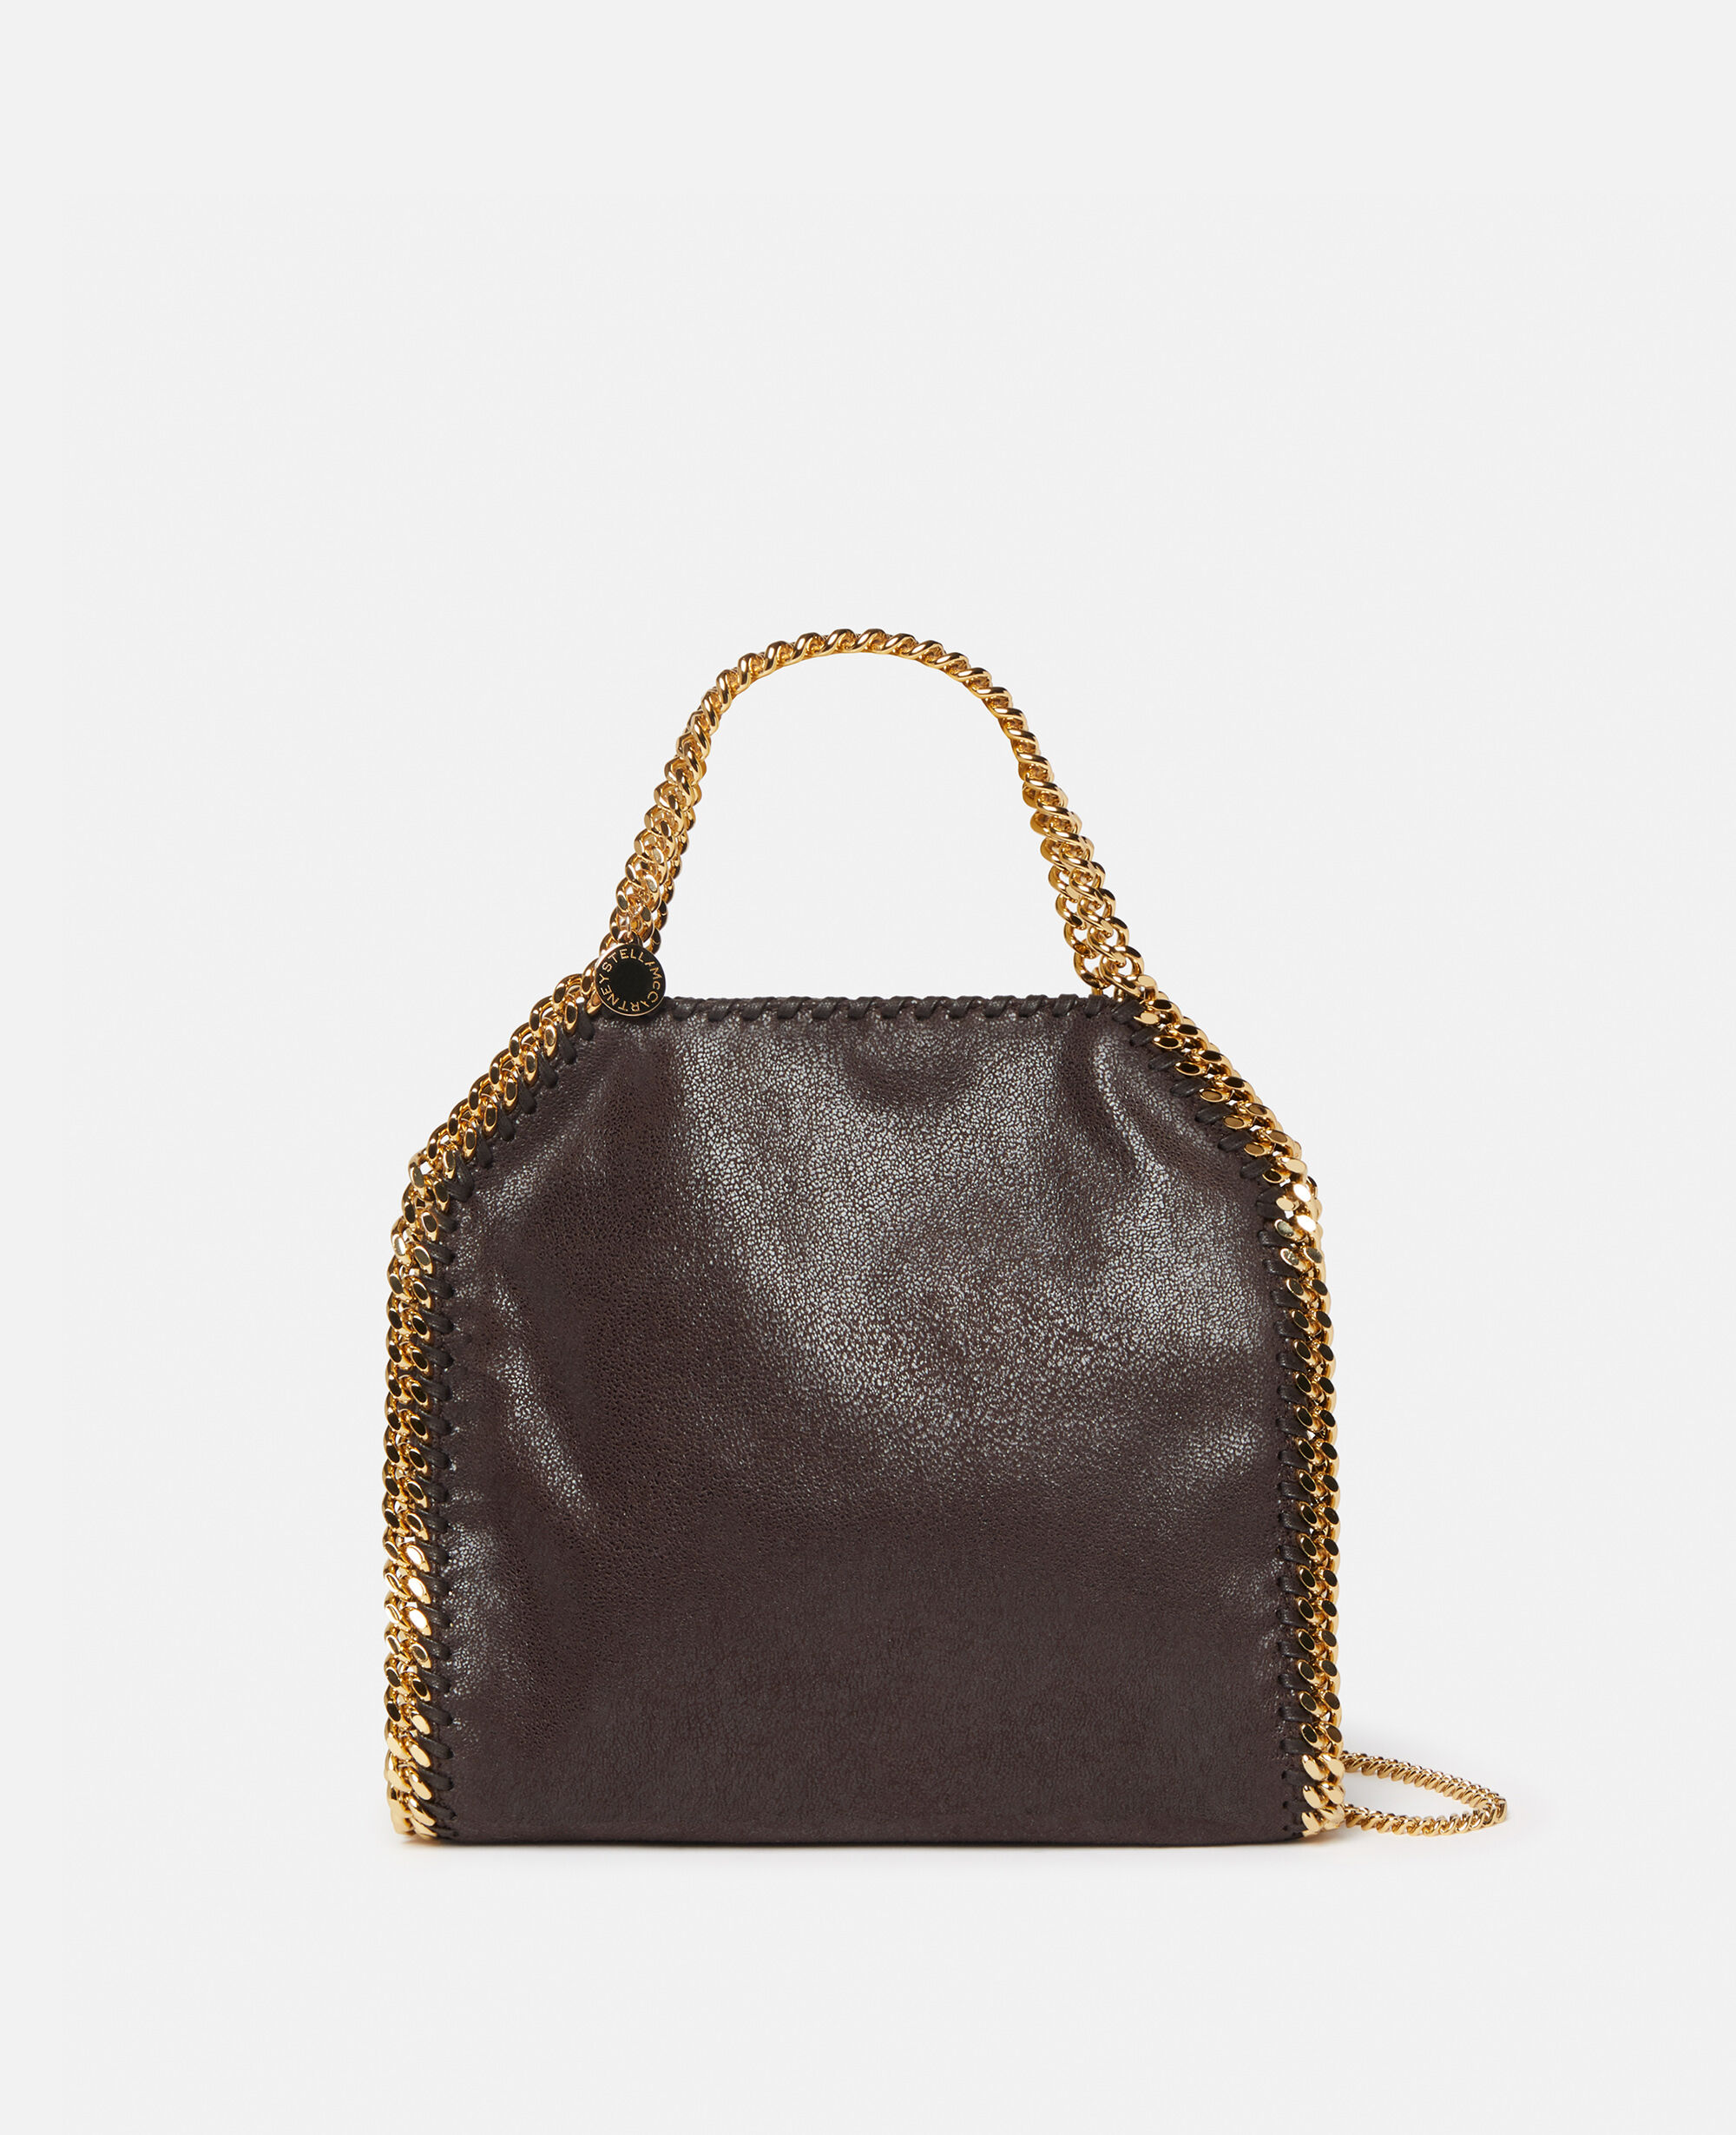 Save 17% Stella McCartney Synthetic Falabella Fold Over Tote Bag in Brown Womens Tote bags Stella McCartney Tote bags 